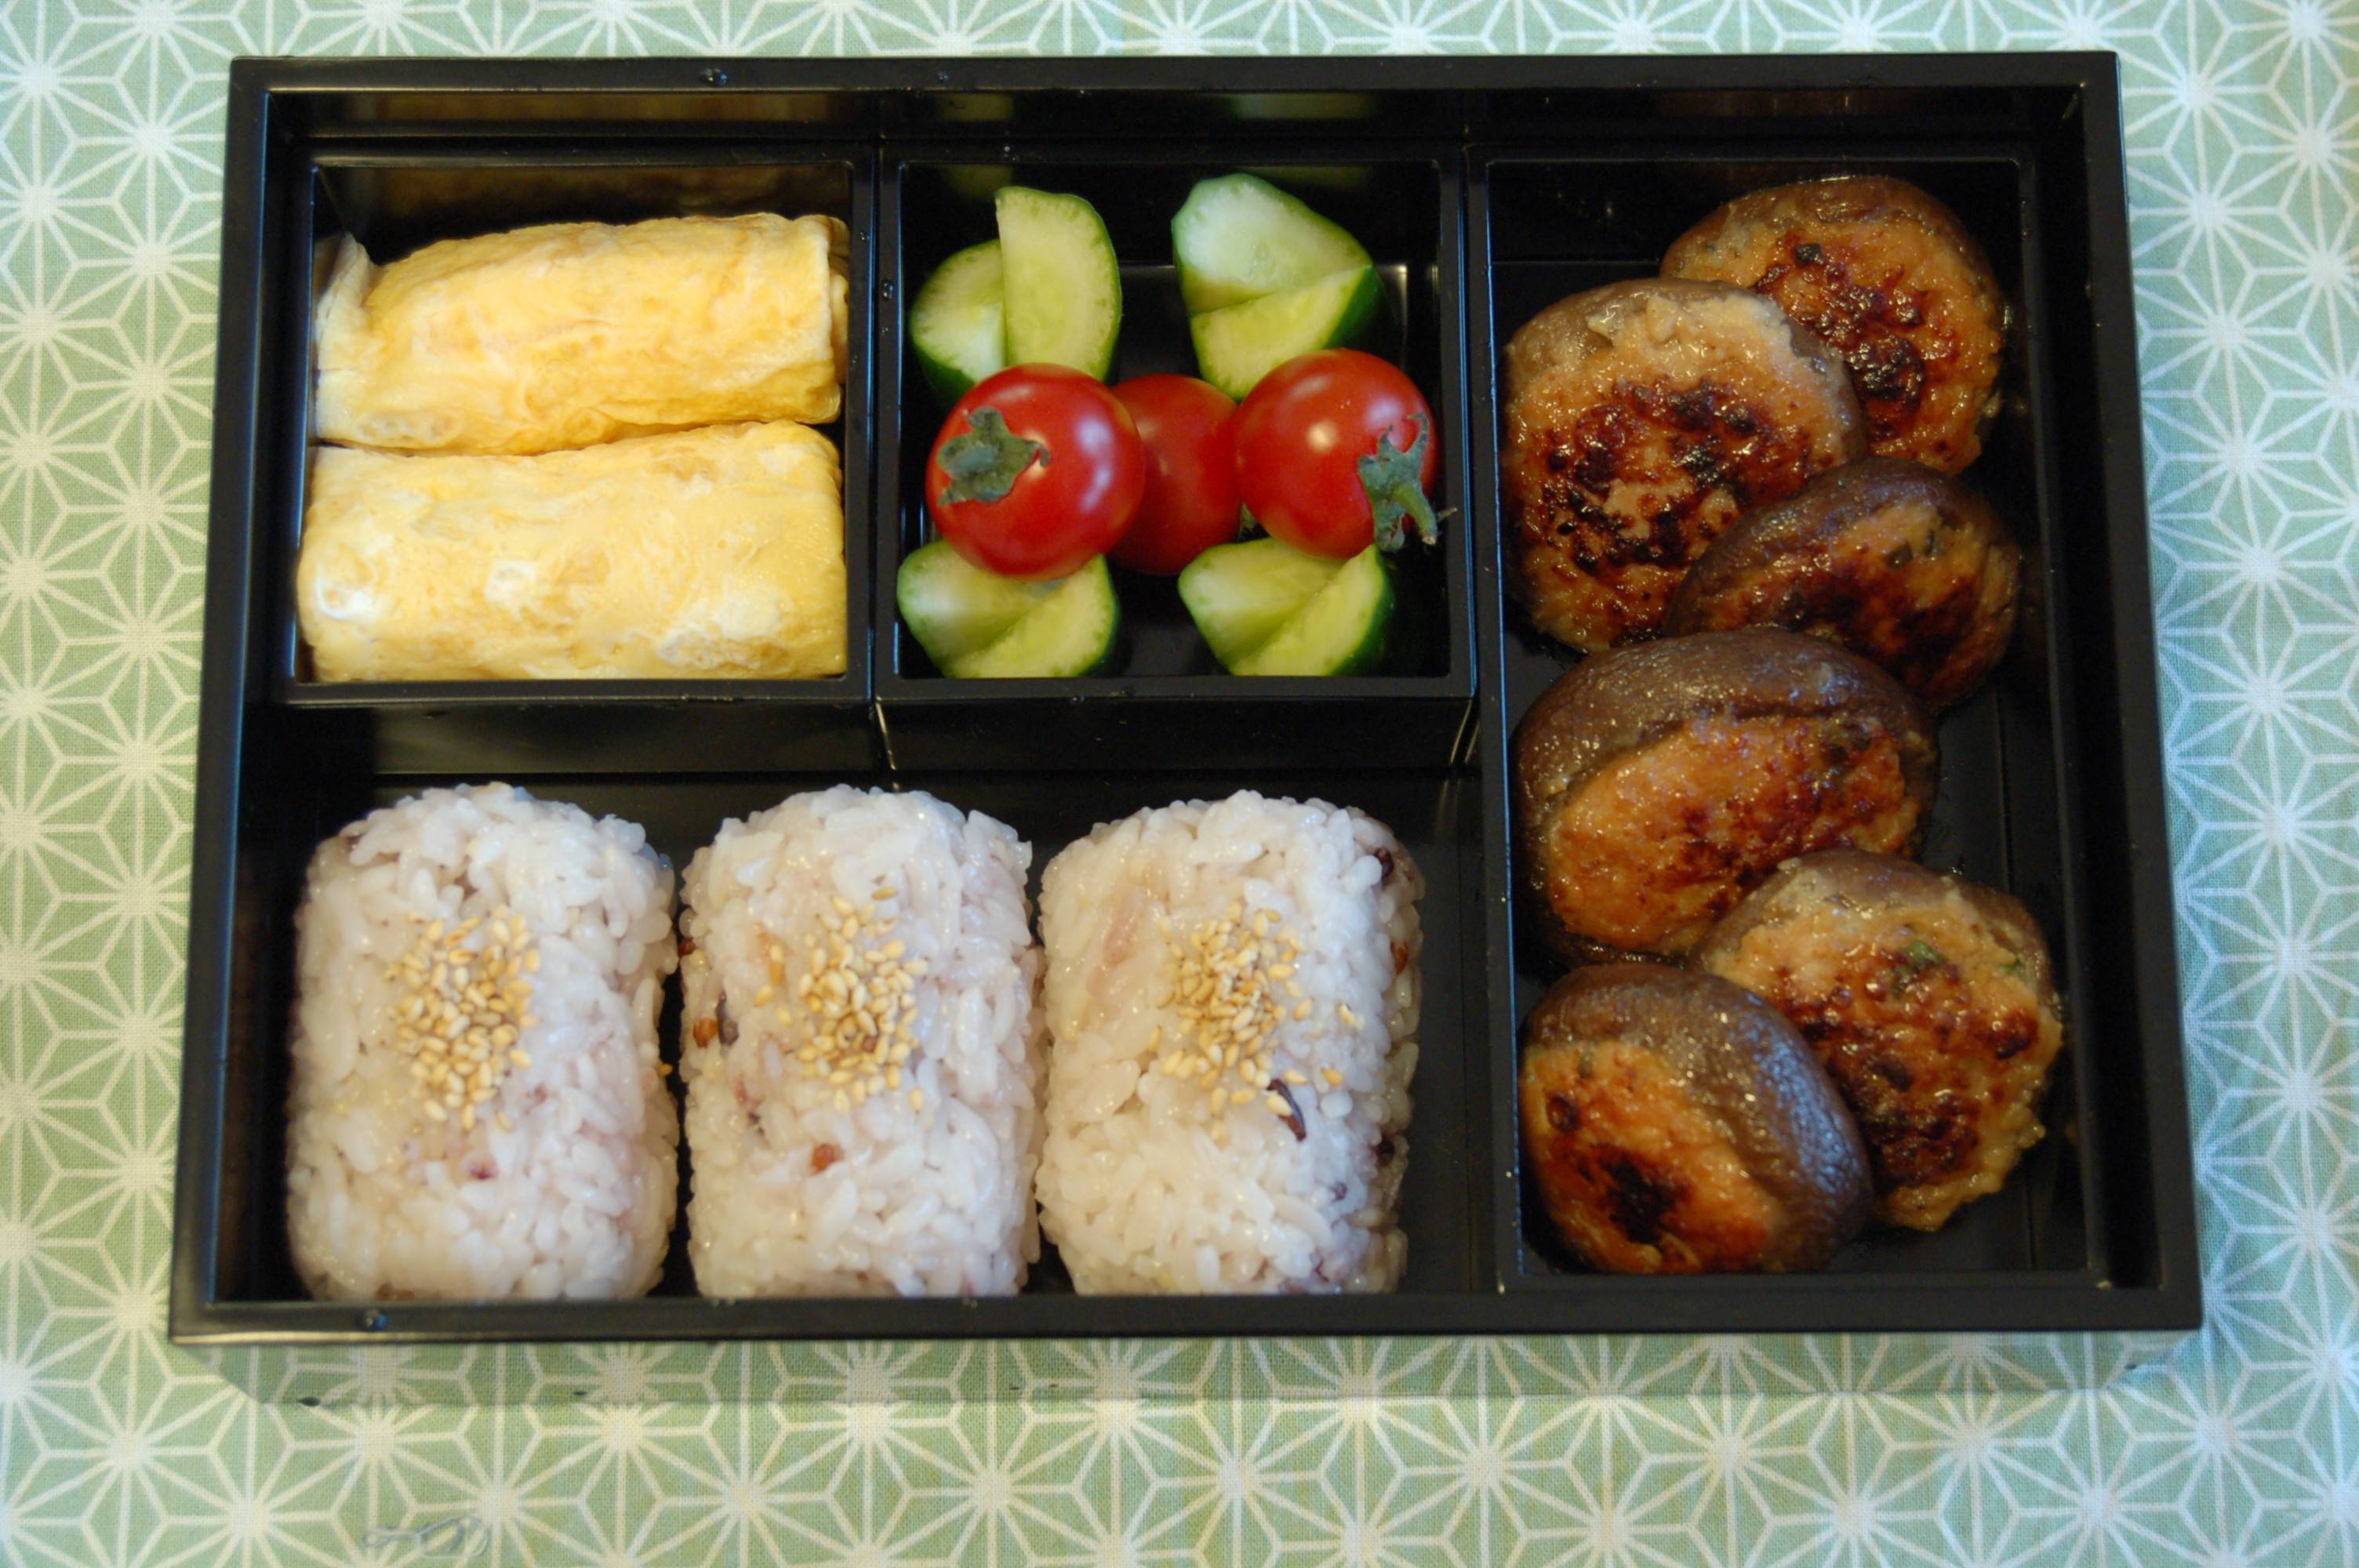 With some handy rice molds and clever knife work, you can put together a bento as easy on the taste buds as it is on the eyes. | ELIZABETH ANDOH